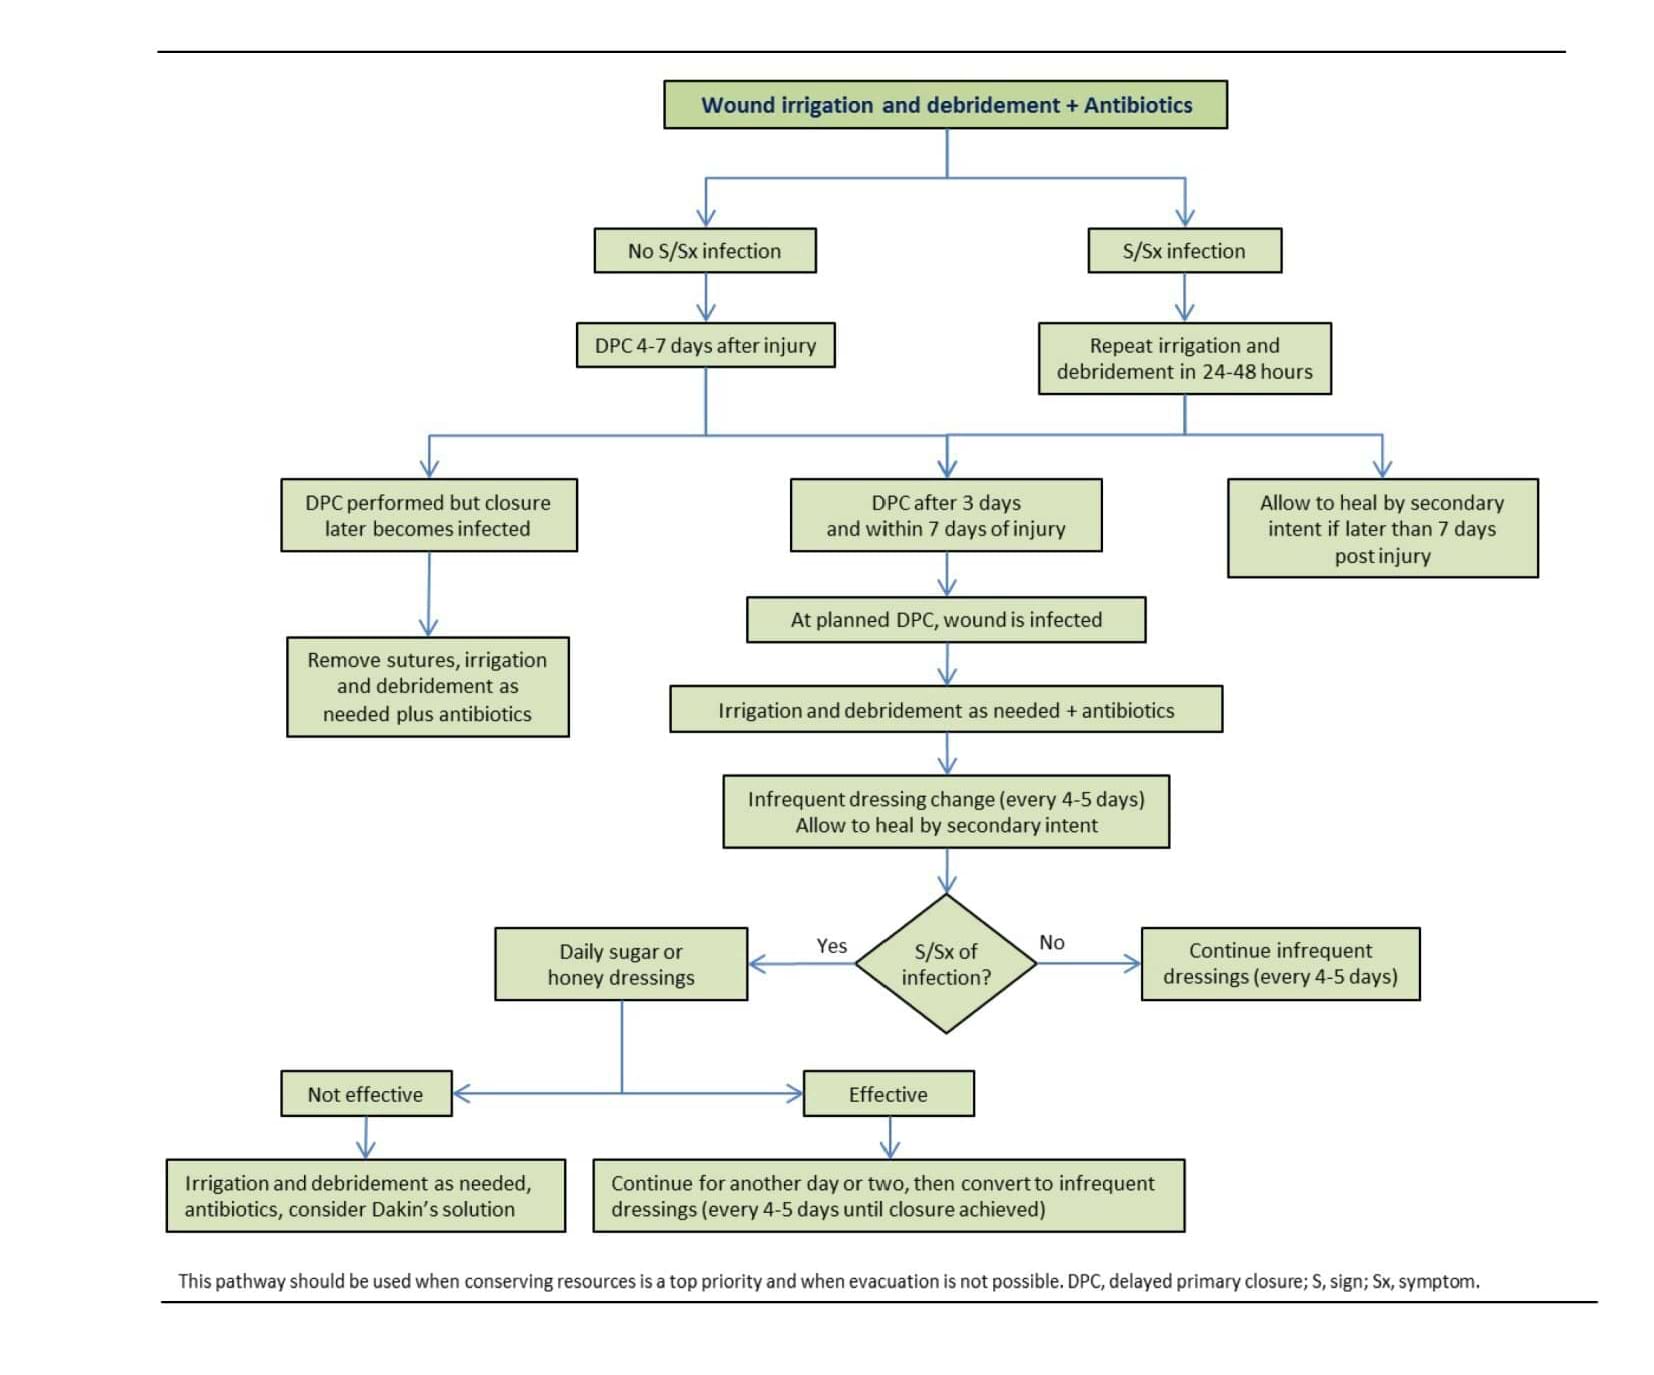 International committee of the red cross surgical wound management flow chart